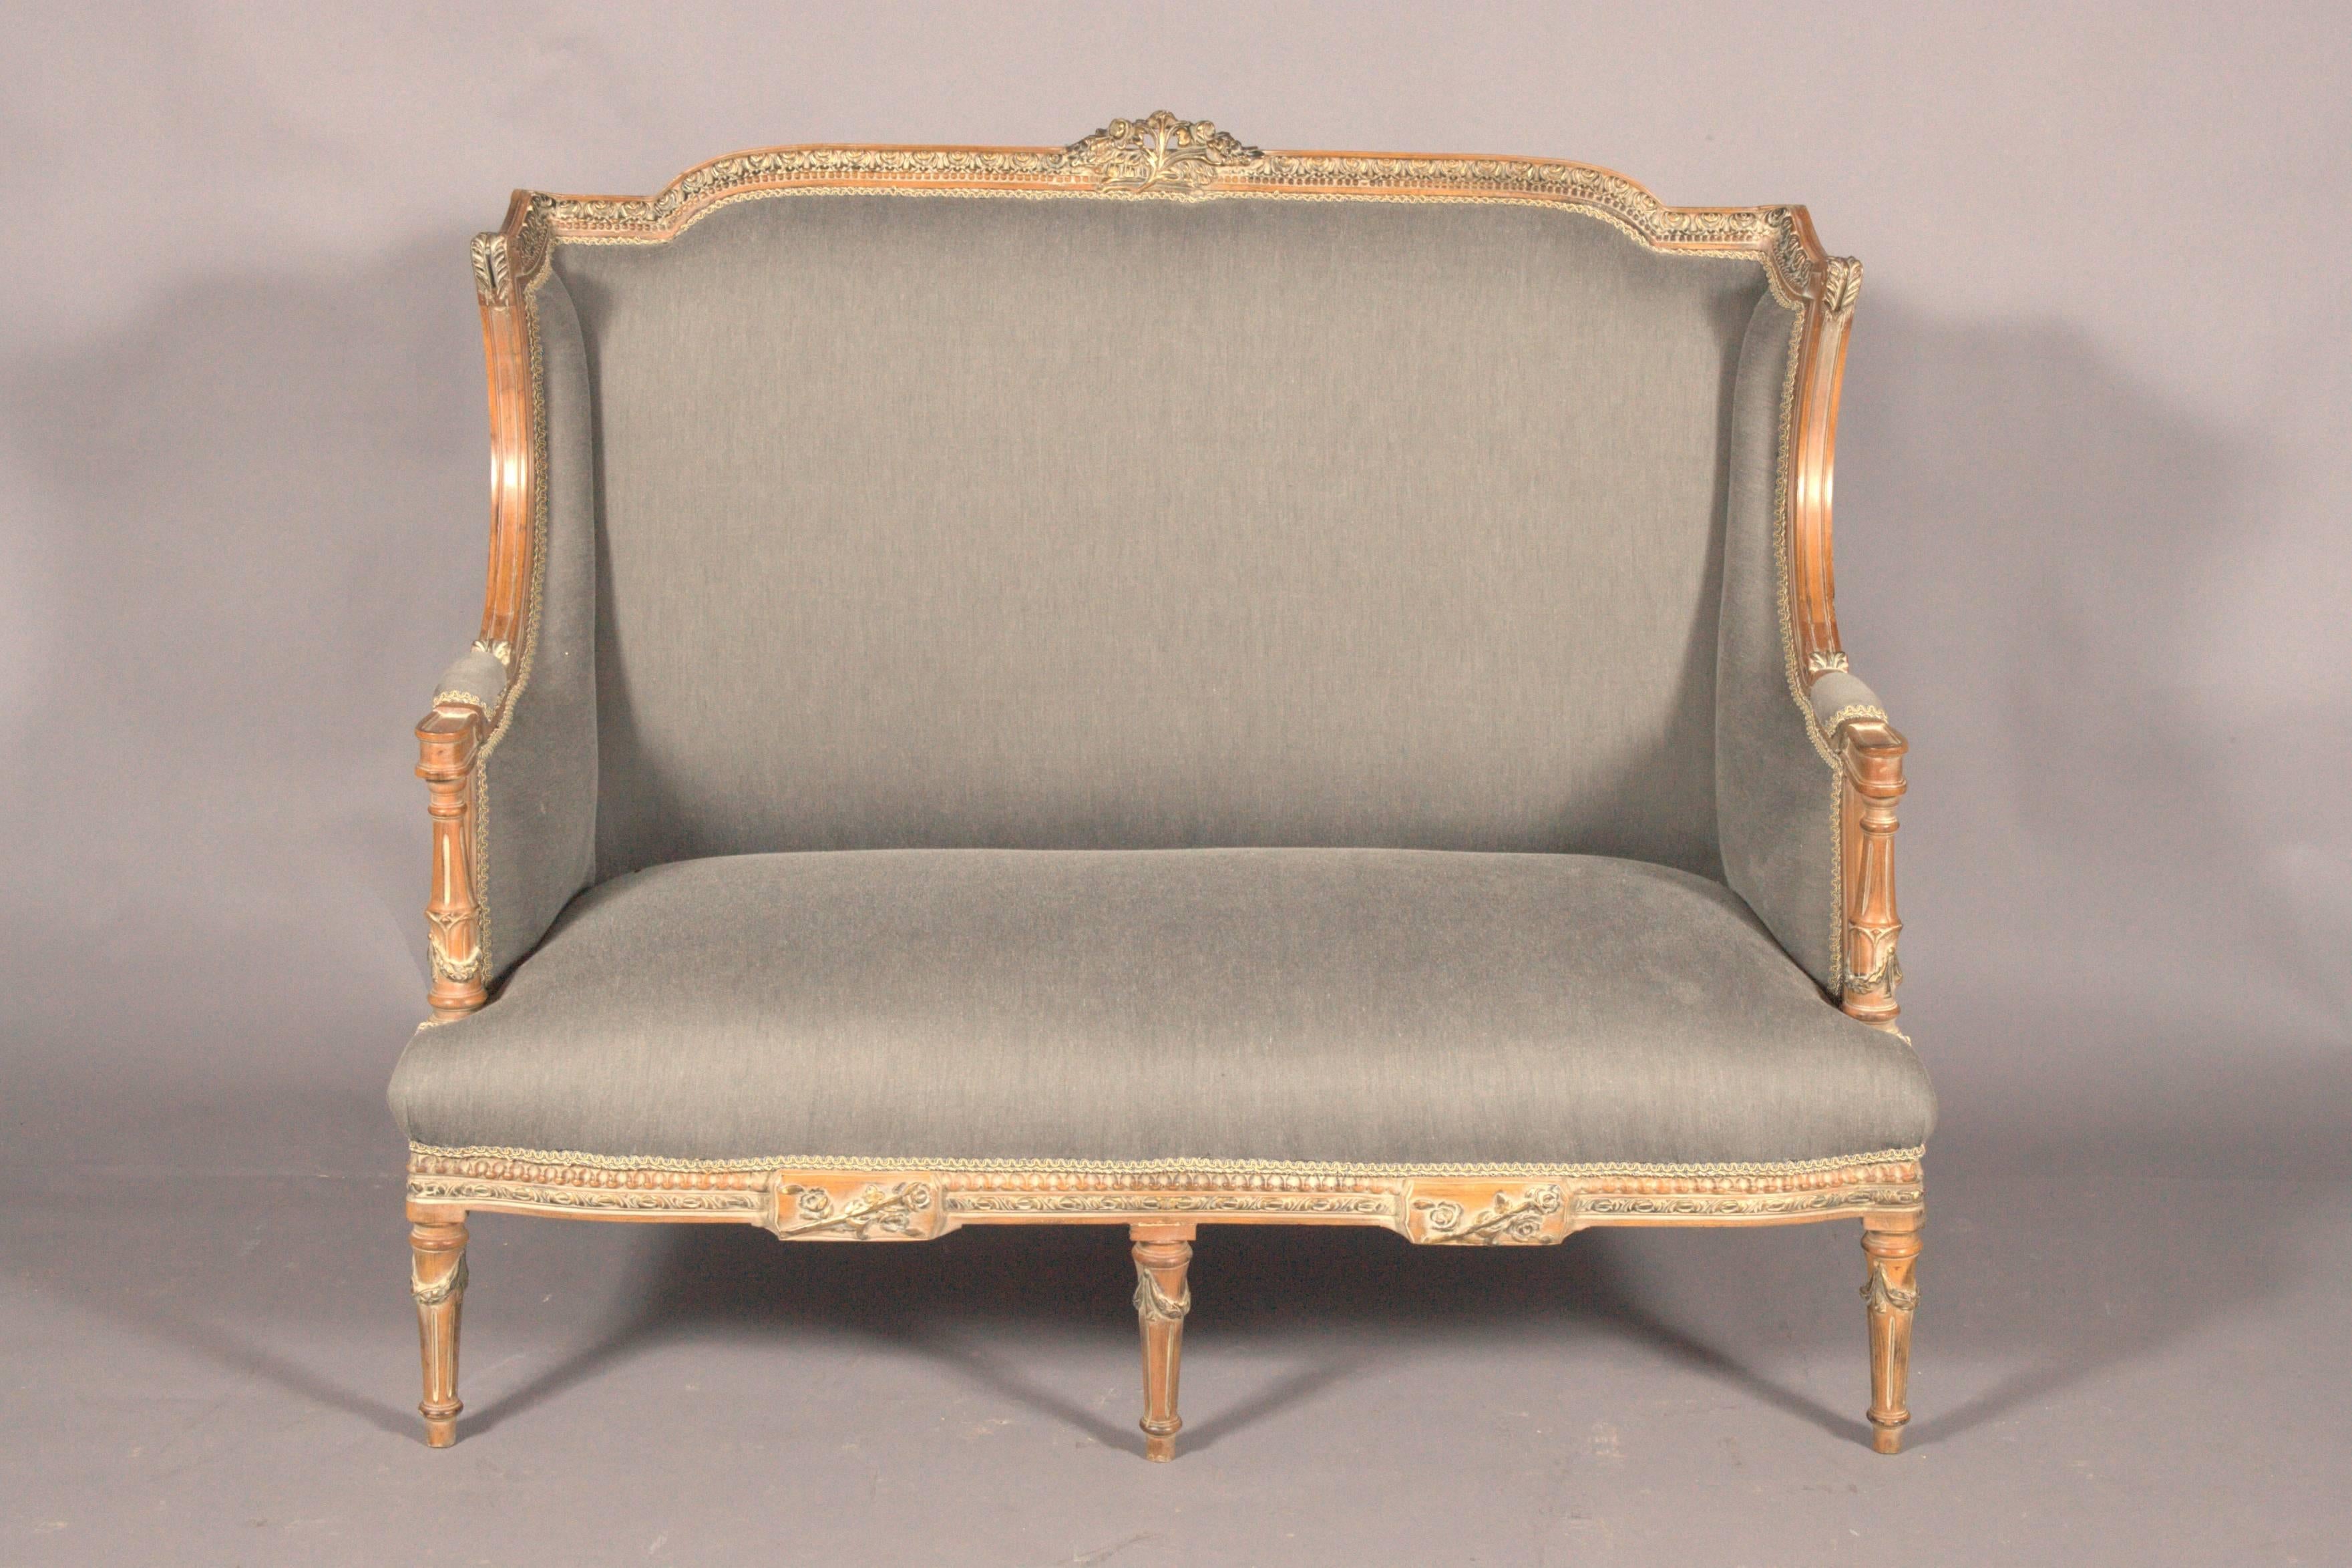 Etruscan decor, English influence evident. Solid beechwood, carved and framed.
Slightly scalloped frame on meshed legs.

Bevelled, carved, slightly ascending armrests. Braided backrest frame with beaded crown. The seat and backrest are finished with